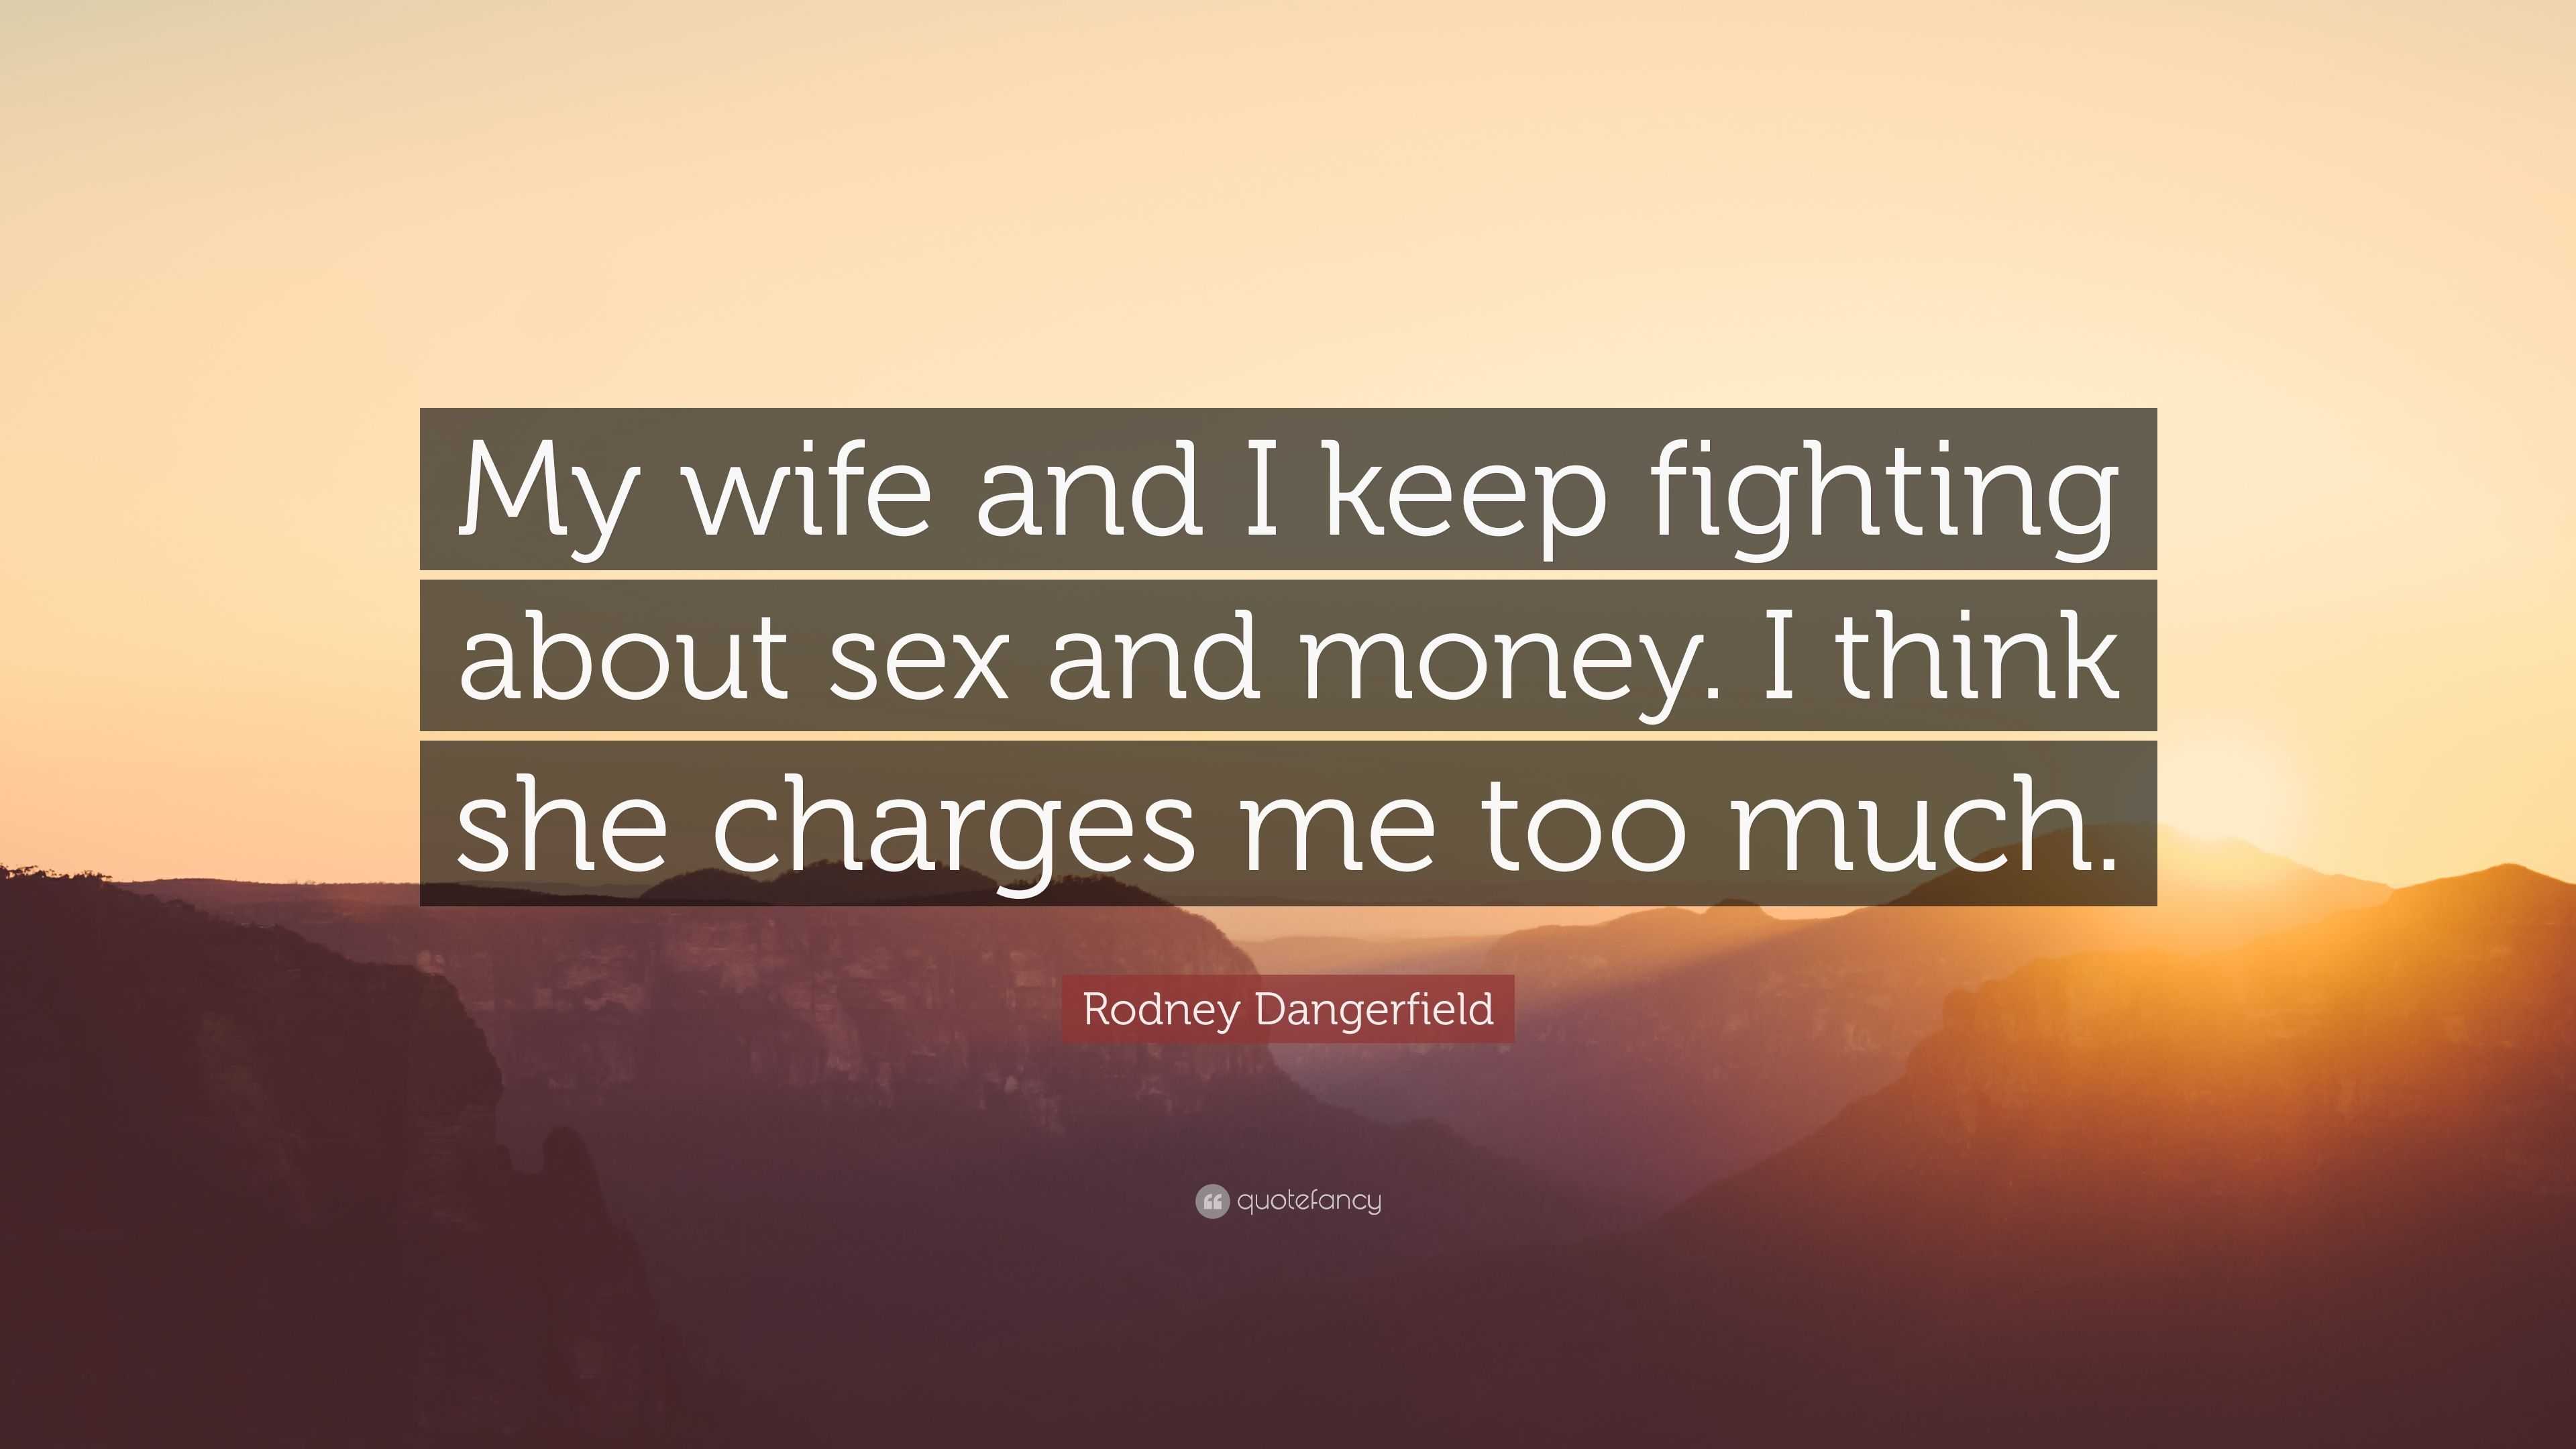 Rodney Dangerfield Quote “My wife and I keep fighting about sex and money hq picture